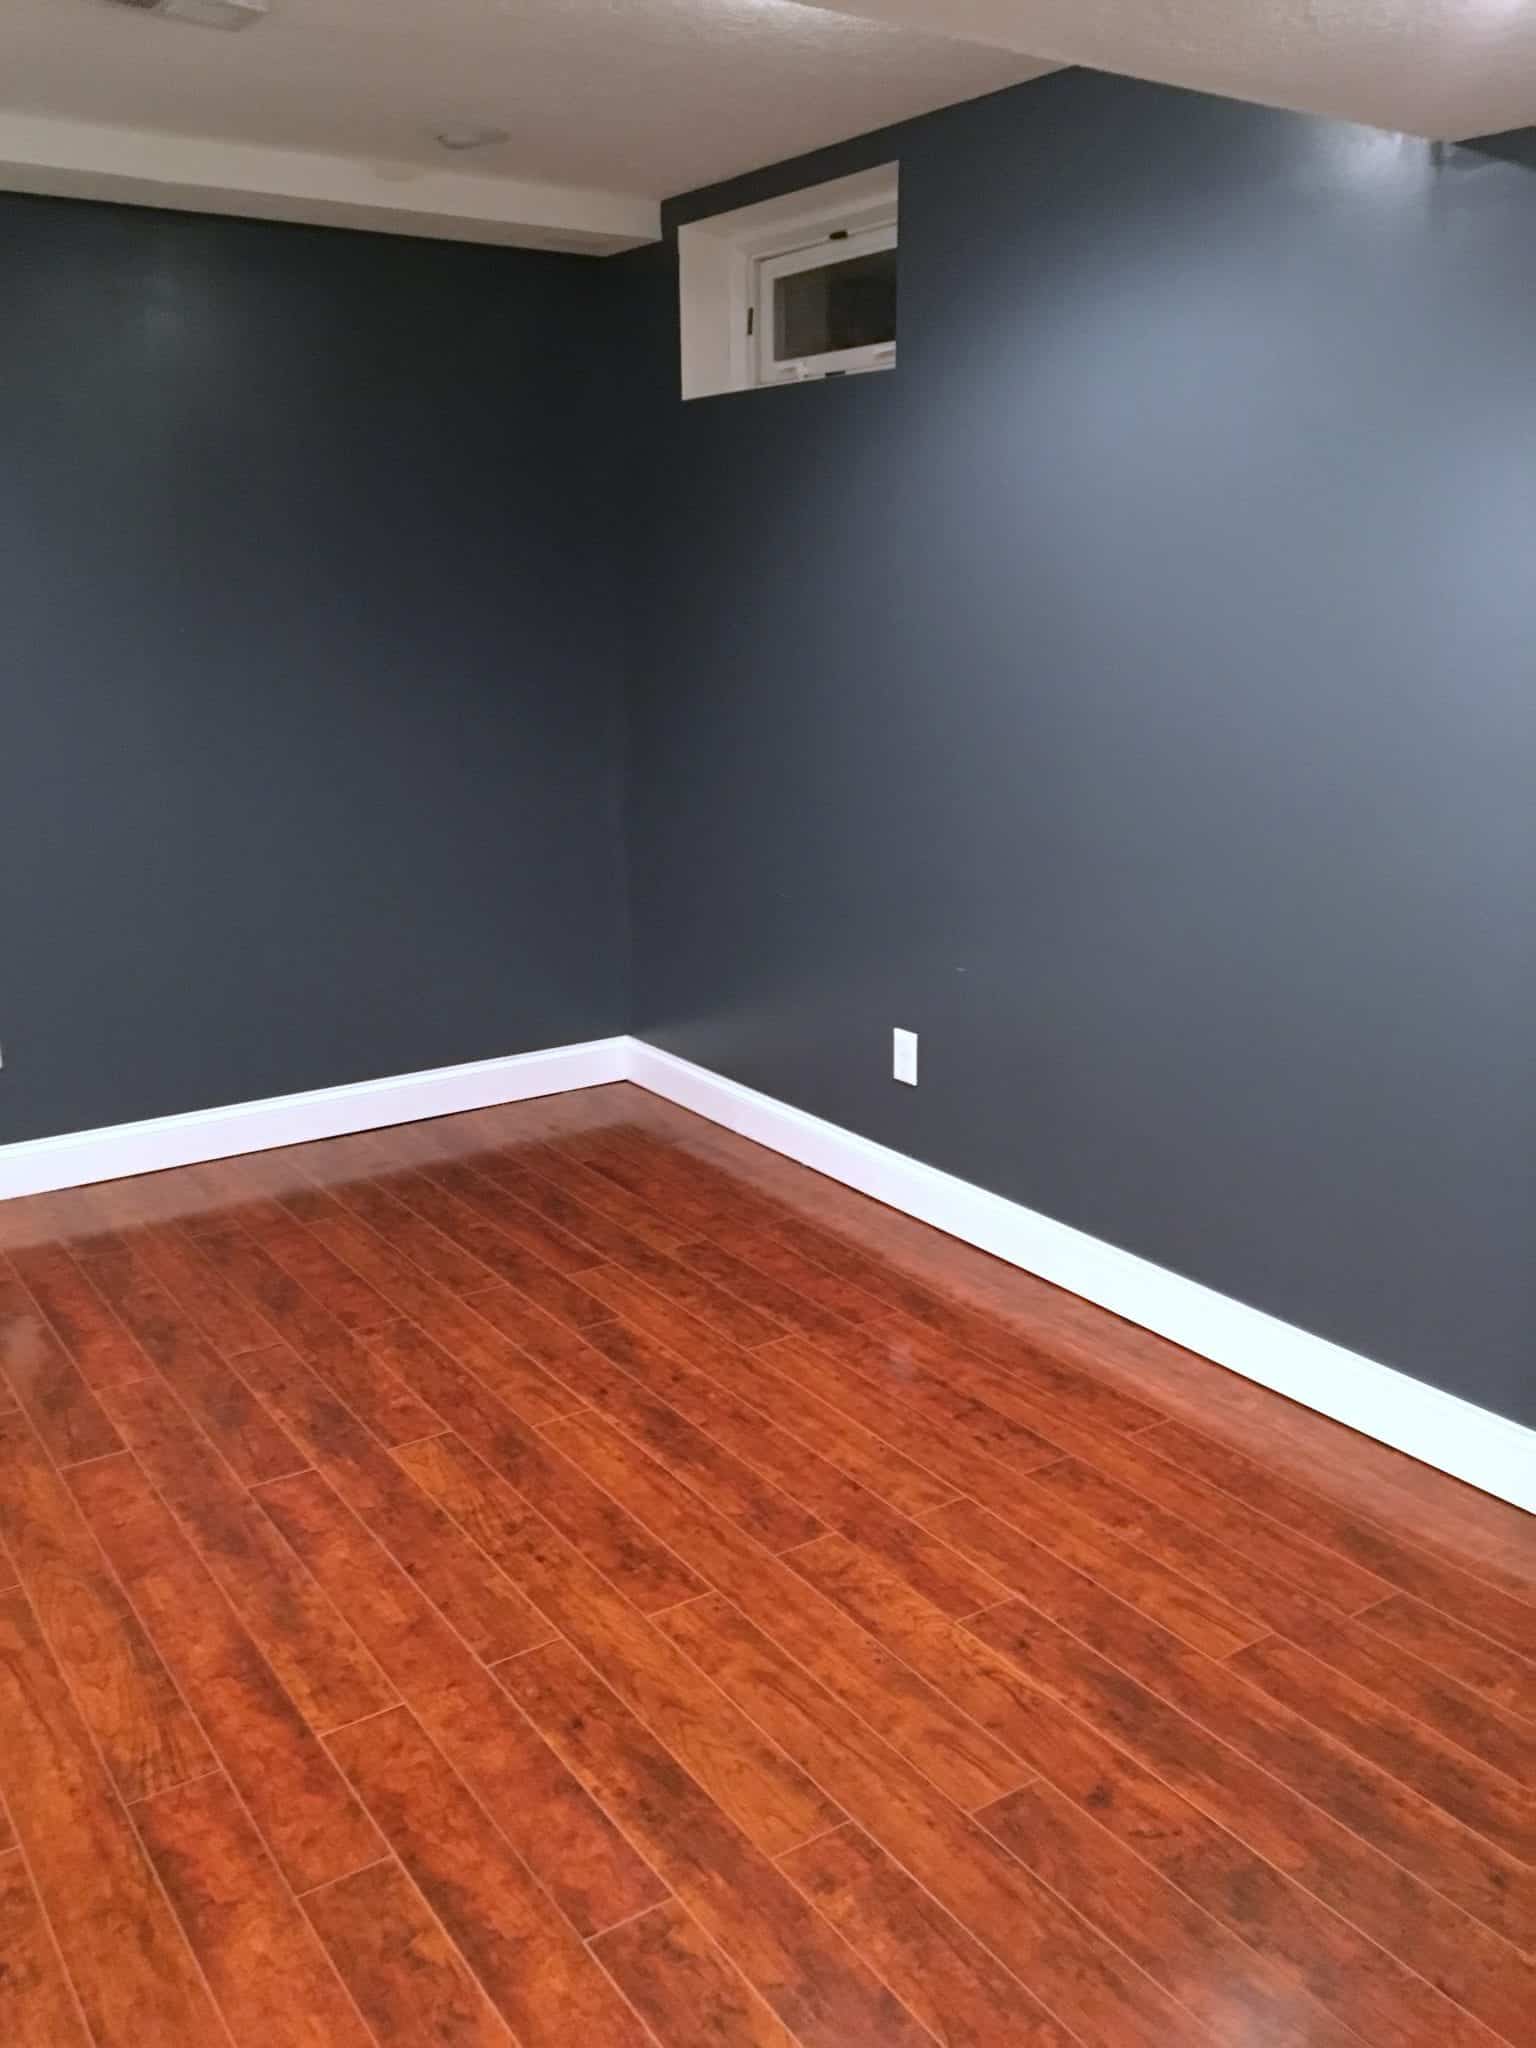 Craft Room Update with new flooring